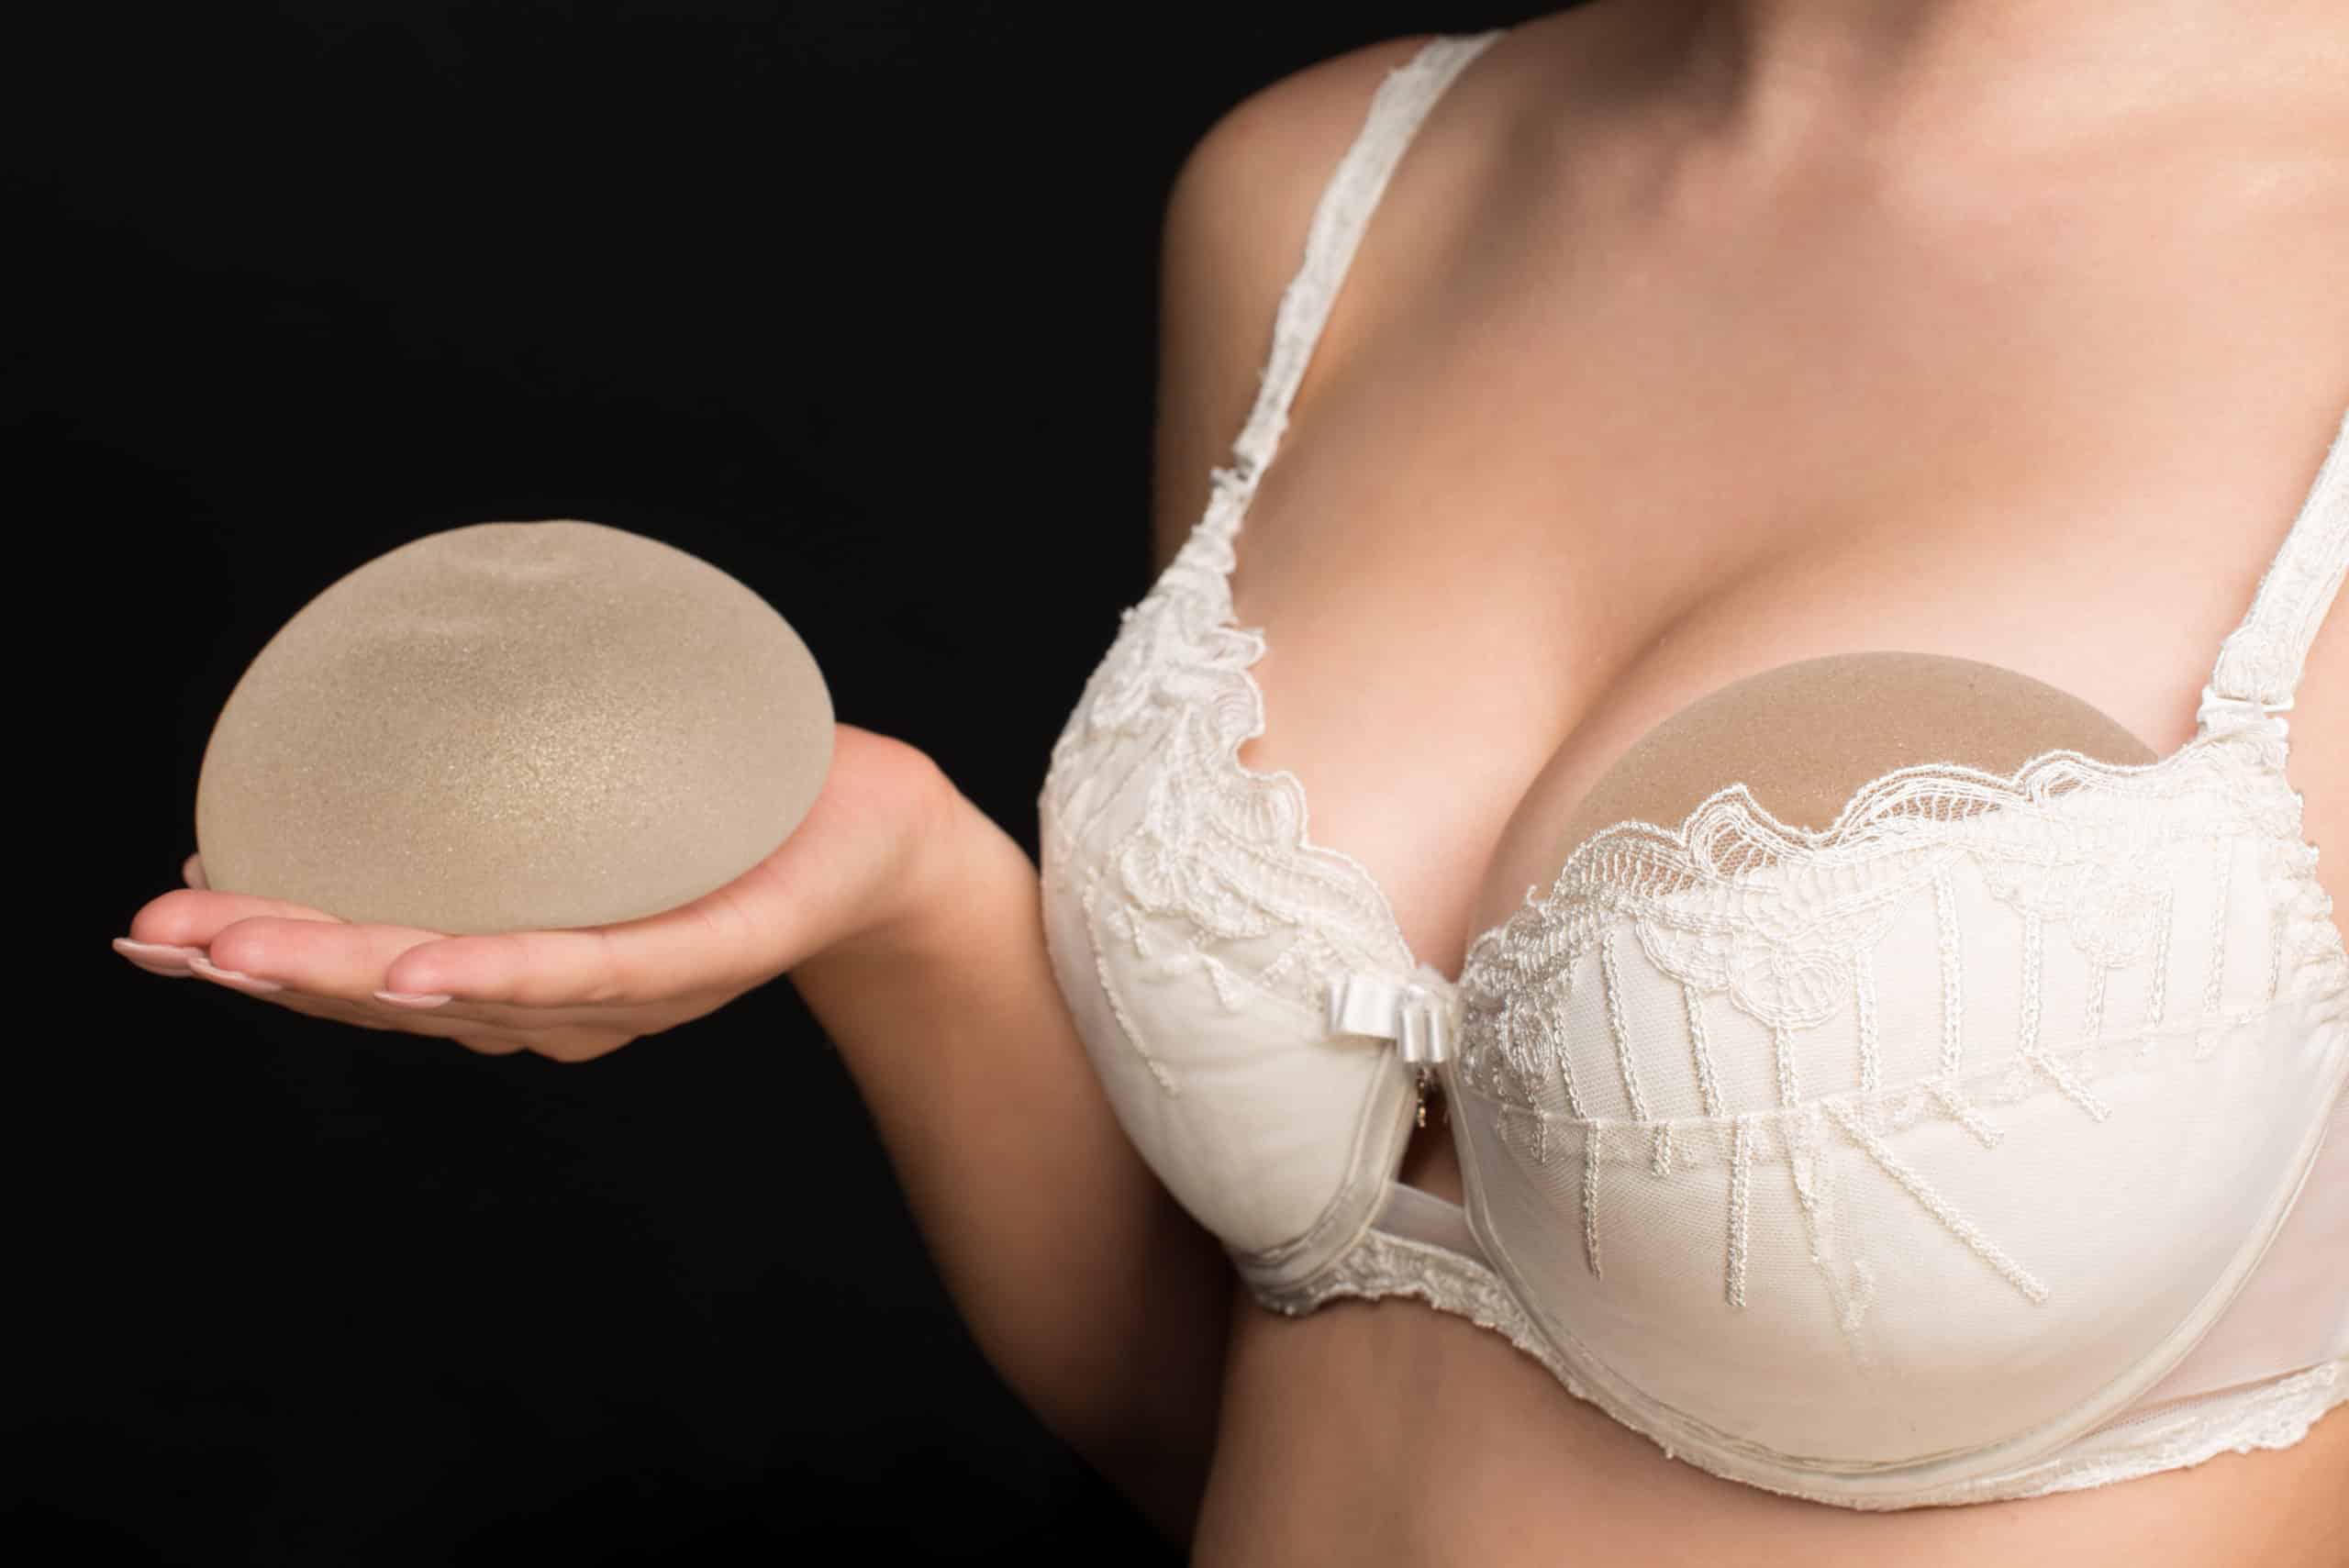 Selecting the Right Size for Breast Implants